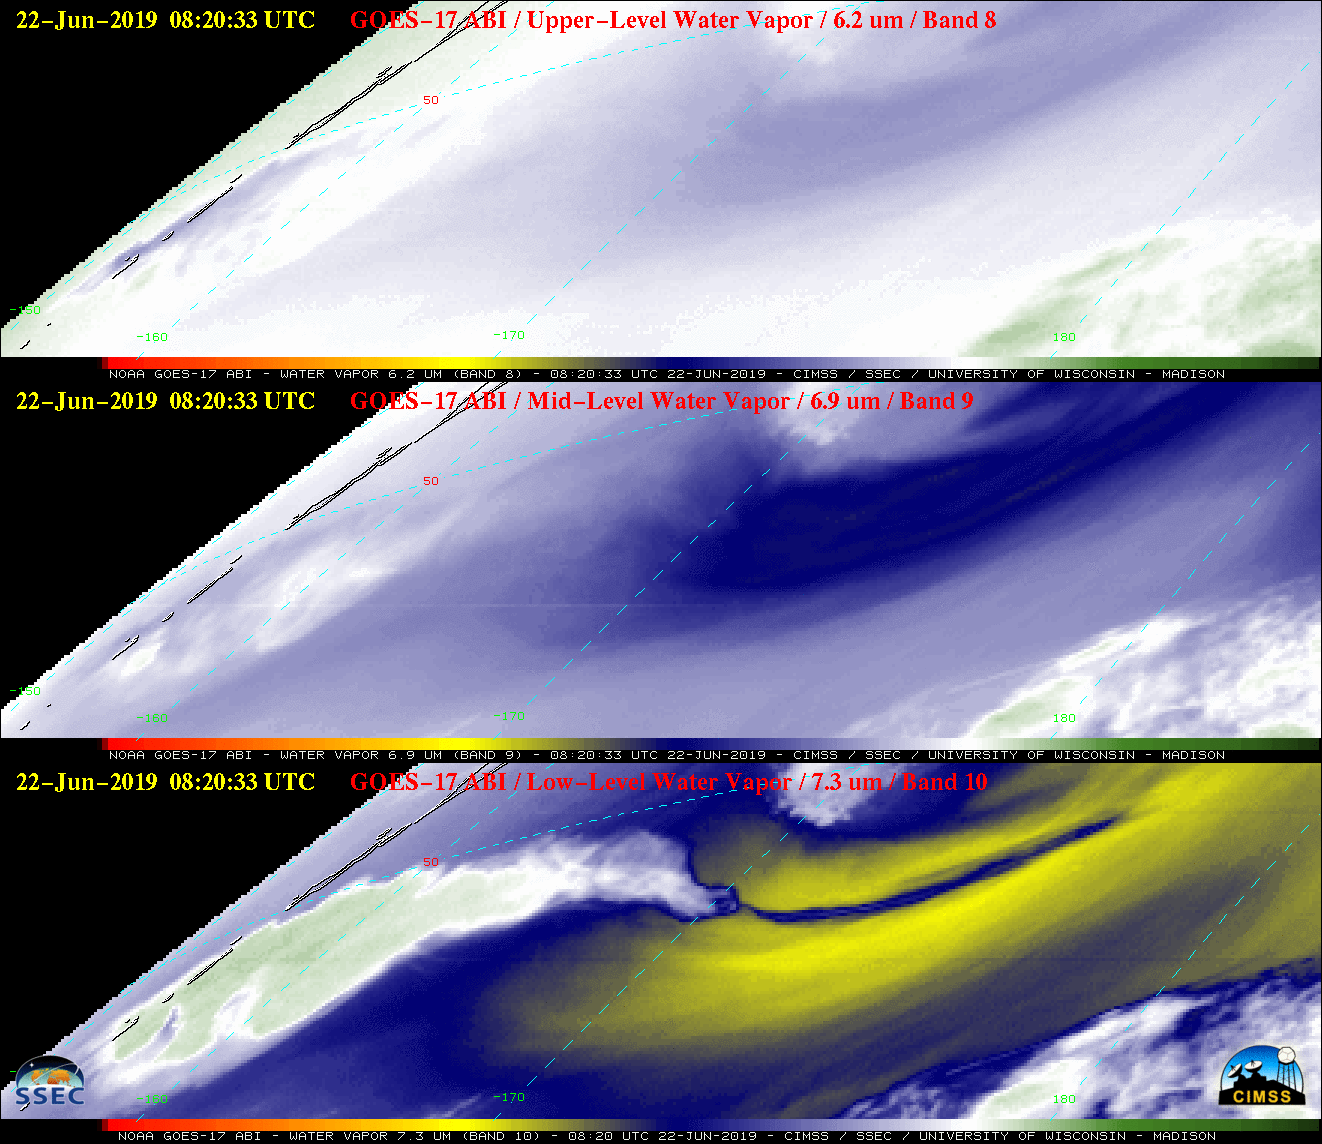 Water Vapor images from GOES-17: Upper-level (6.2 µm, top), Mid-level (6.9 µm, middle) and Low-level (7.3 µm, bottom) [click to play animation | MP4]